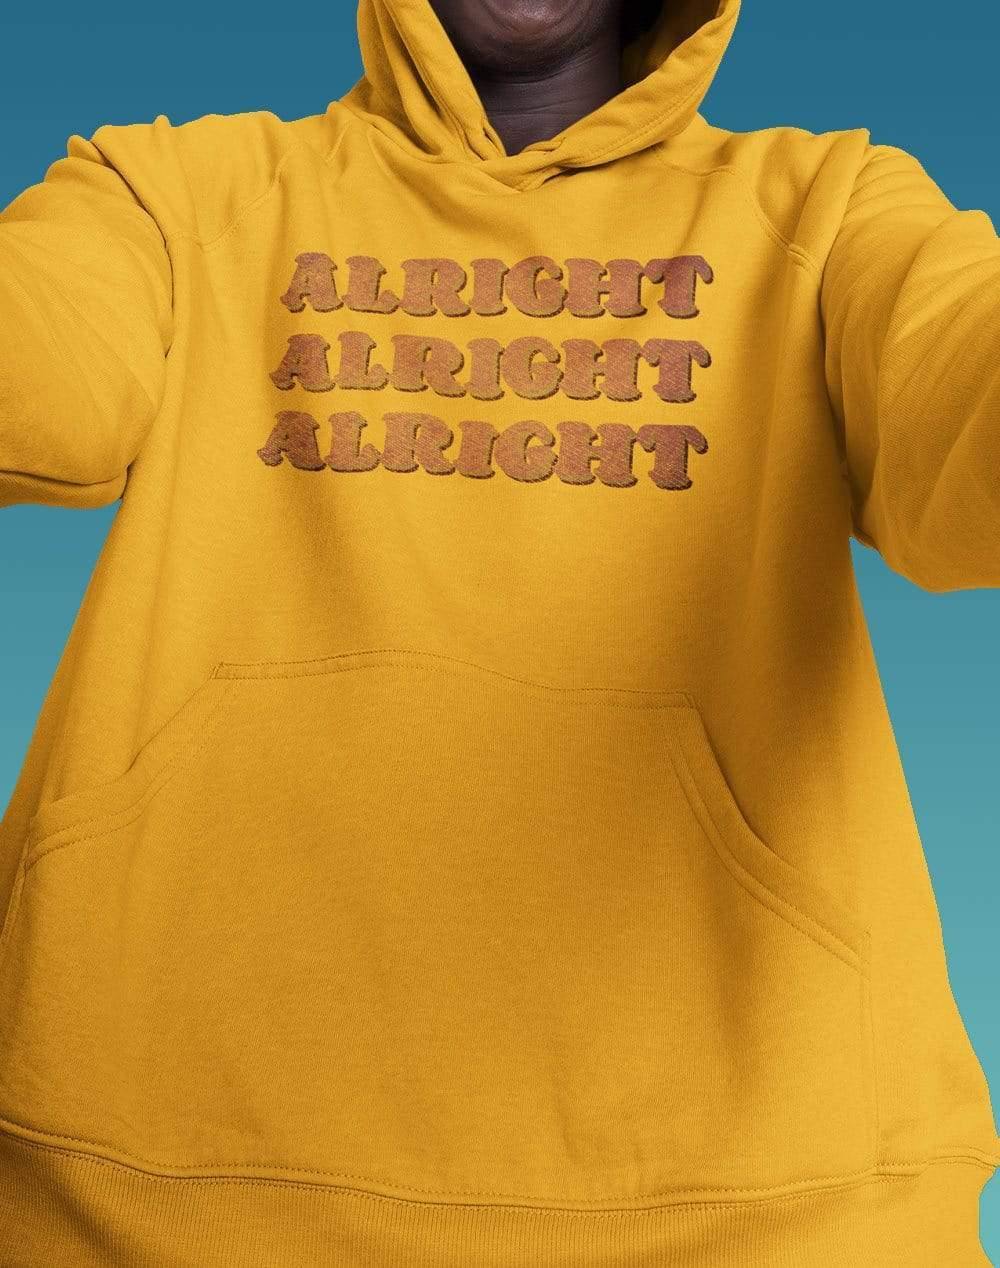 Alright Alright Alright Hoodie  - Off World Tees